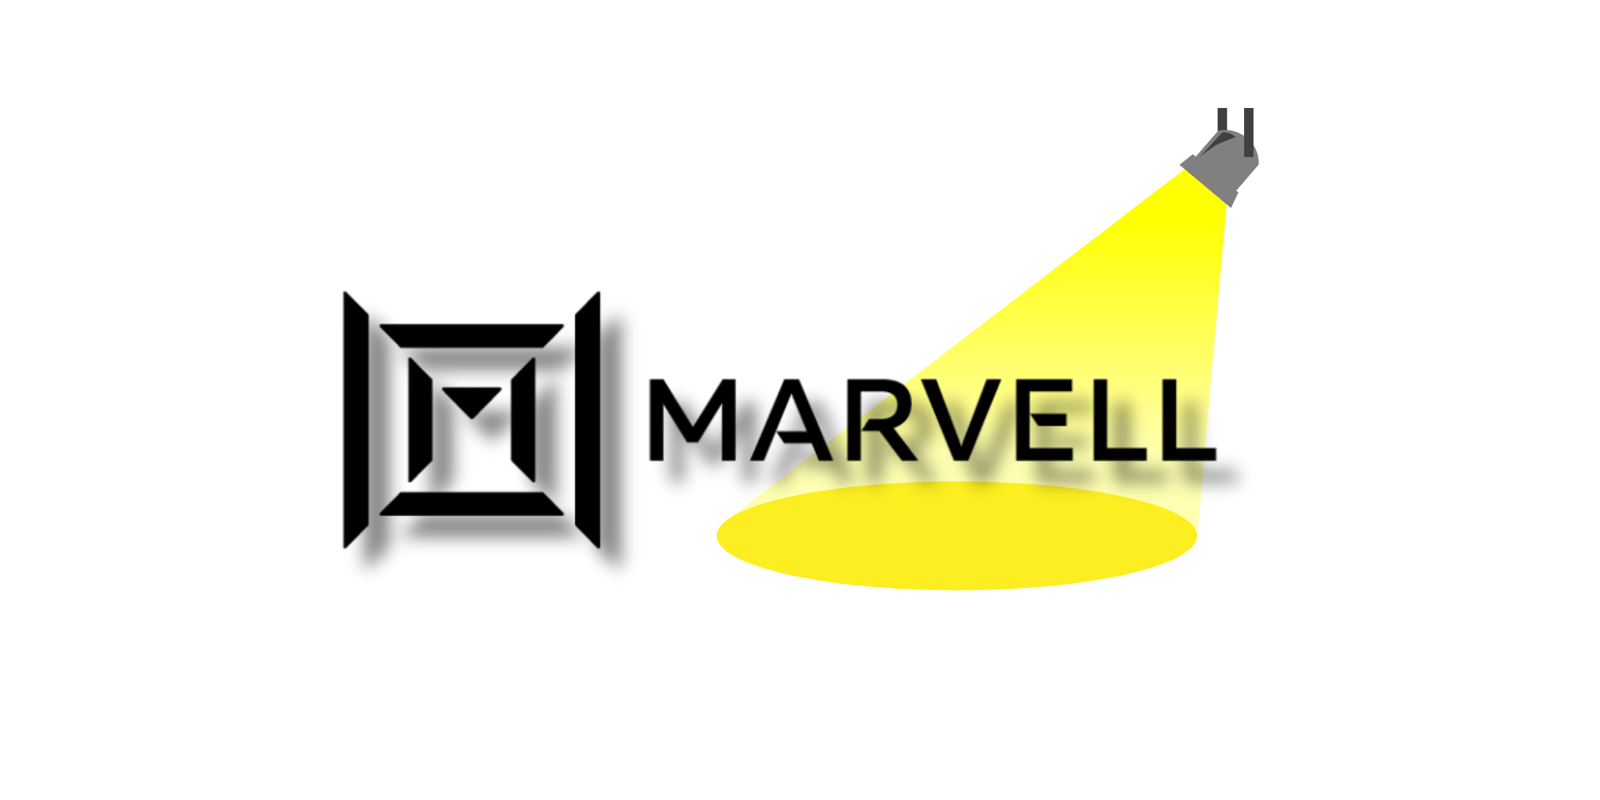 Marvell Blog  We're Building the Future of Data Infrastructure